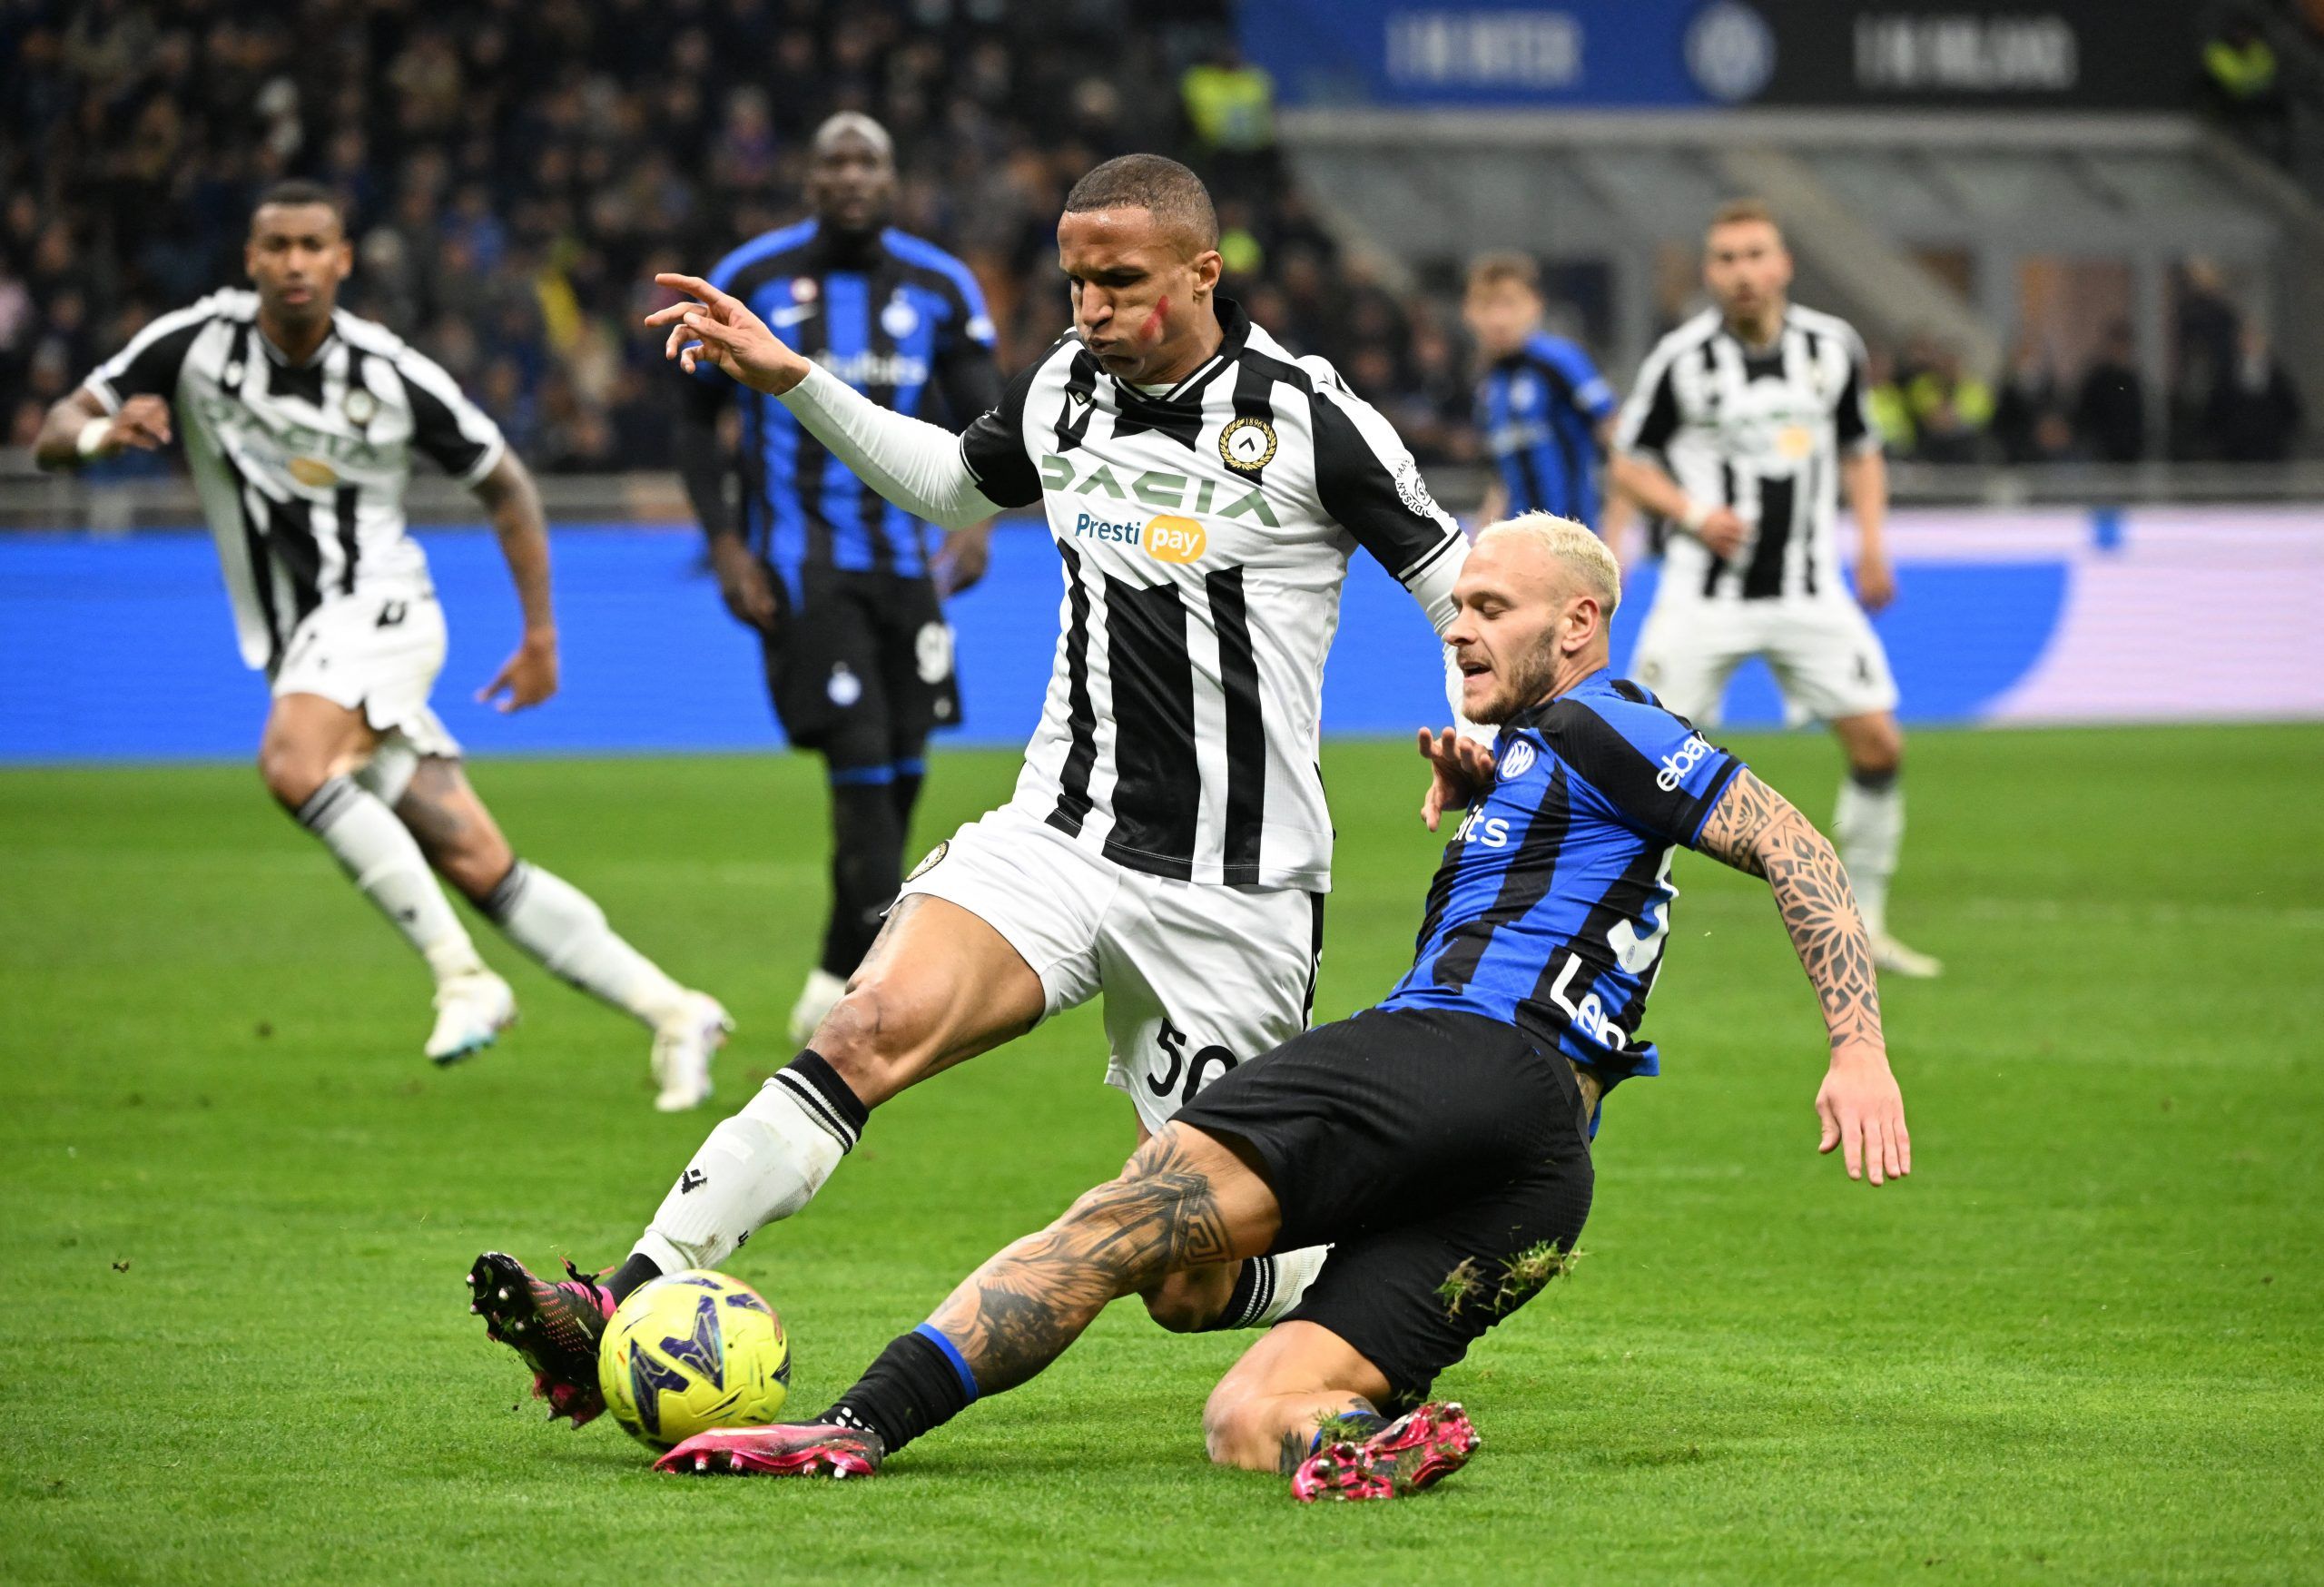 Soccer Football - Serie A - Inter Milan v Udinese - San Siro, Milan, Italy - February 18, 2023 Udinese's Rodrigo Becao in action with Inter Milan's Federico Dimarco REUTERS/Alberto Lingria